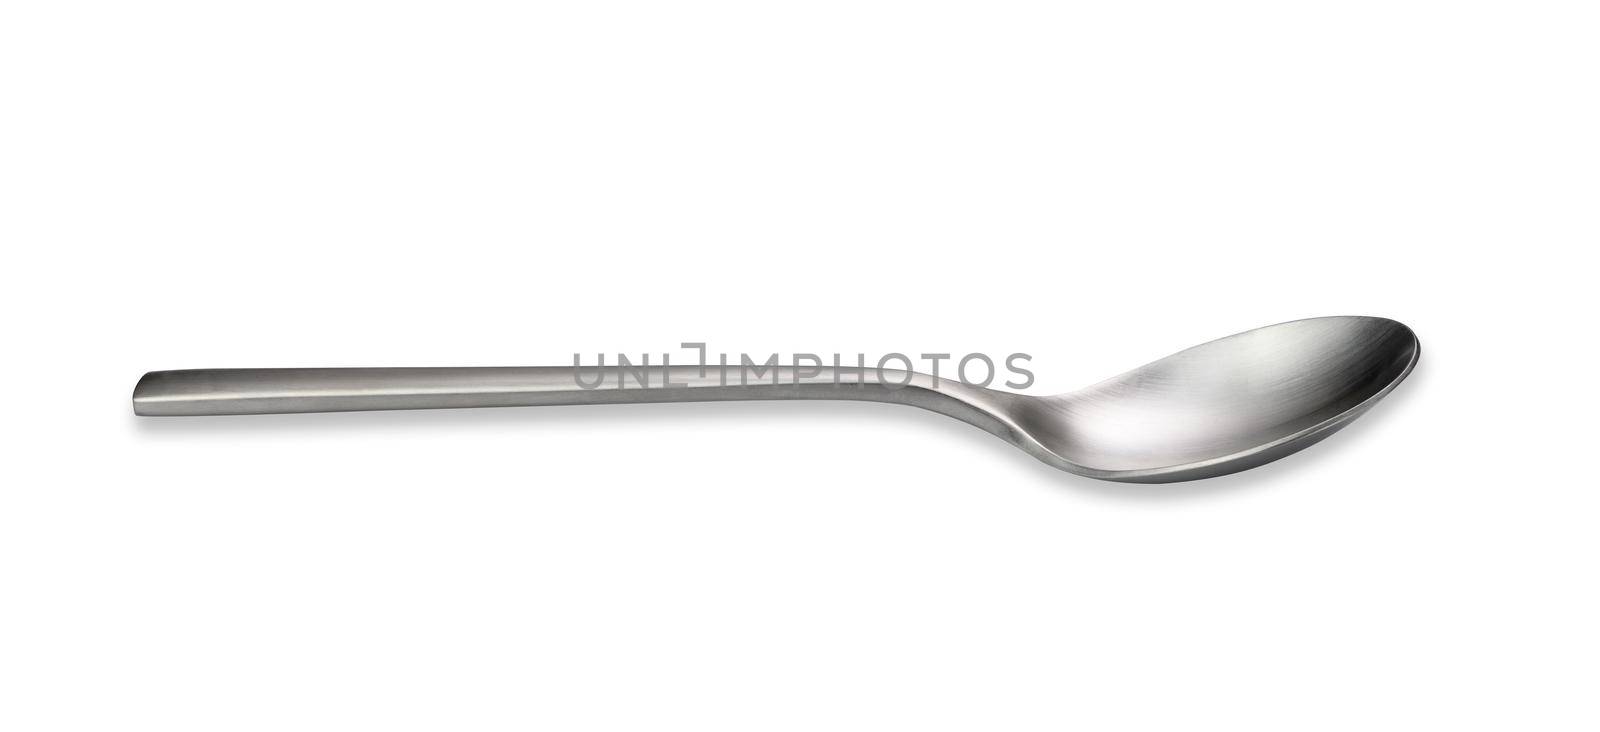 Empty metal spoon on a white isolated background. Brushed steel texture by ndanko